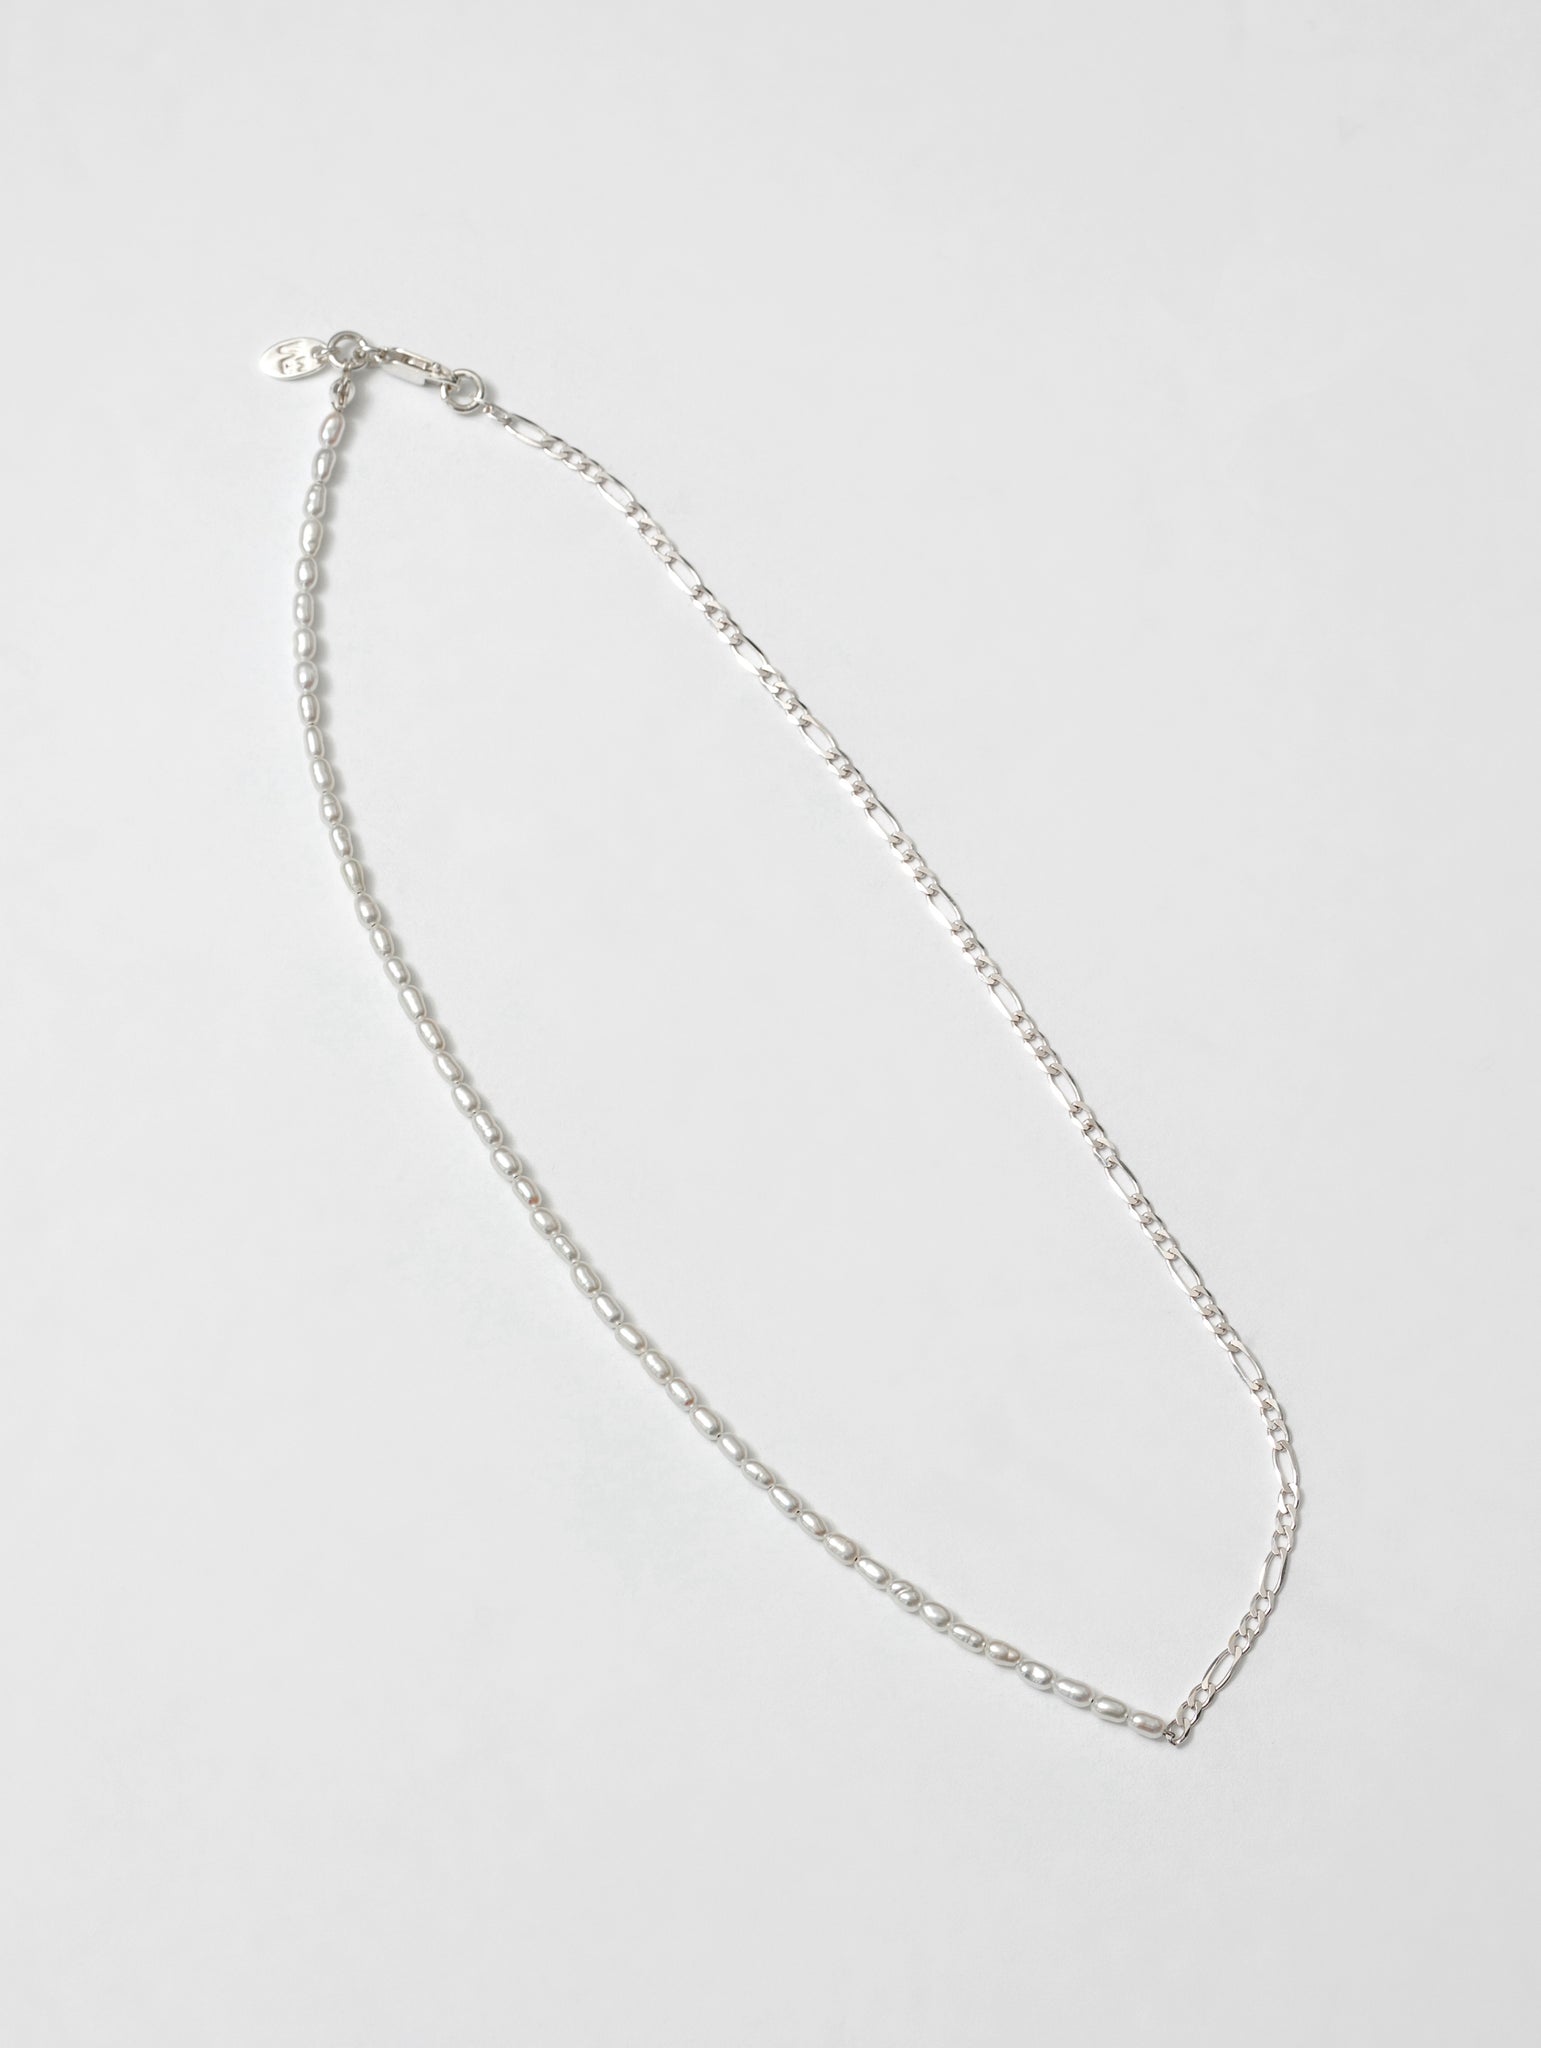 Wolf Circus Miniature Pearl Figaro Chain Combination Necklace 925 Sterling Silver | Mara Necklace in Sterling Silver-Necklaces-wolfcircus.com